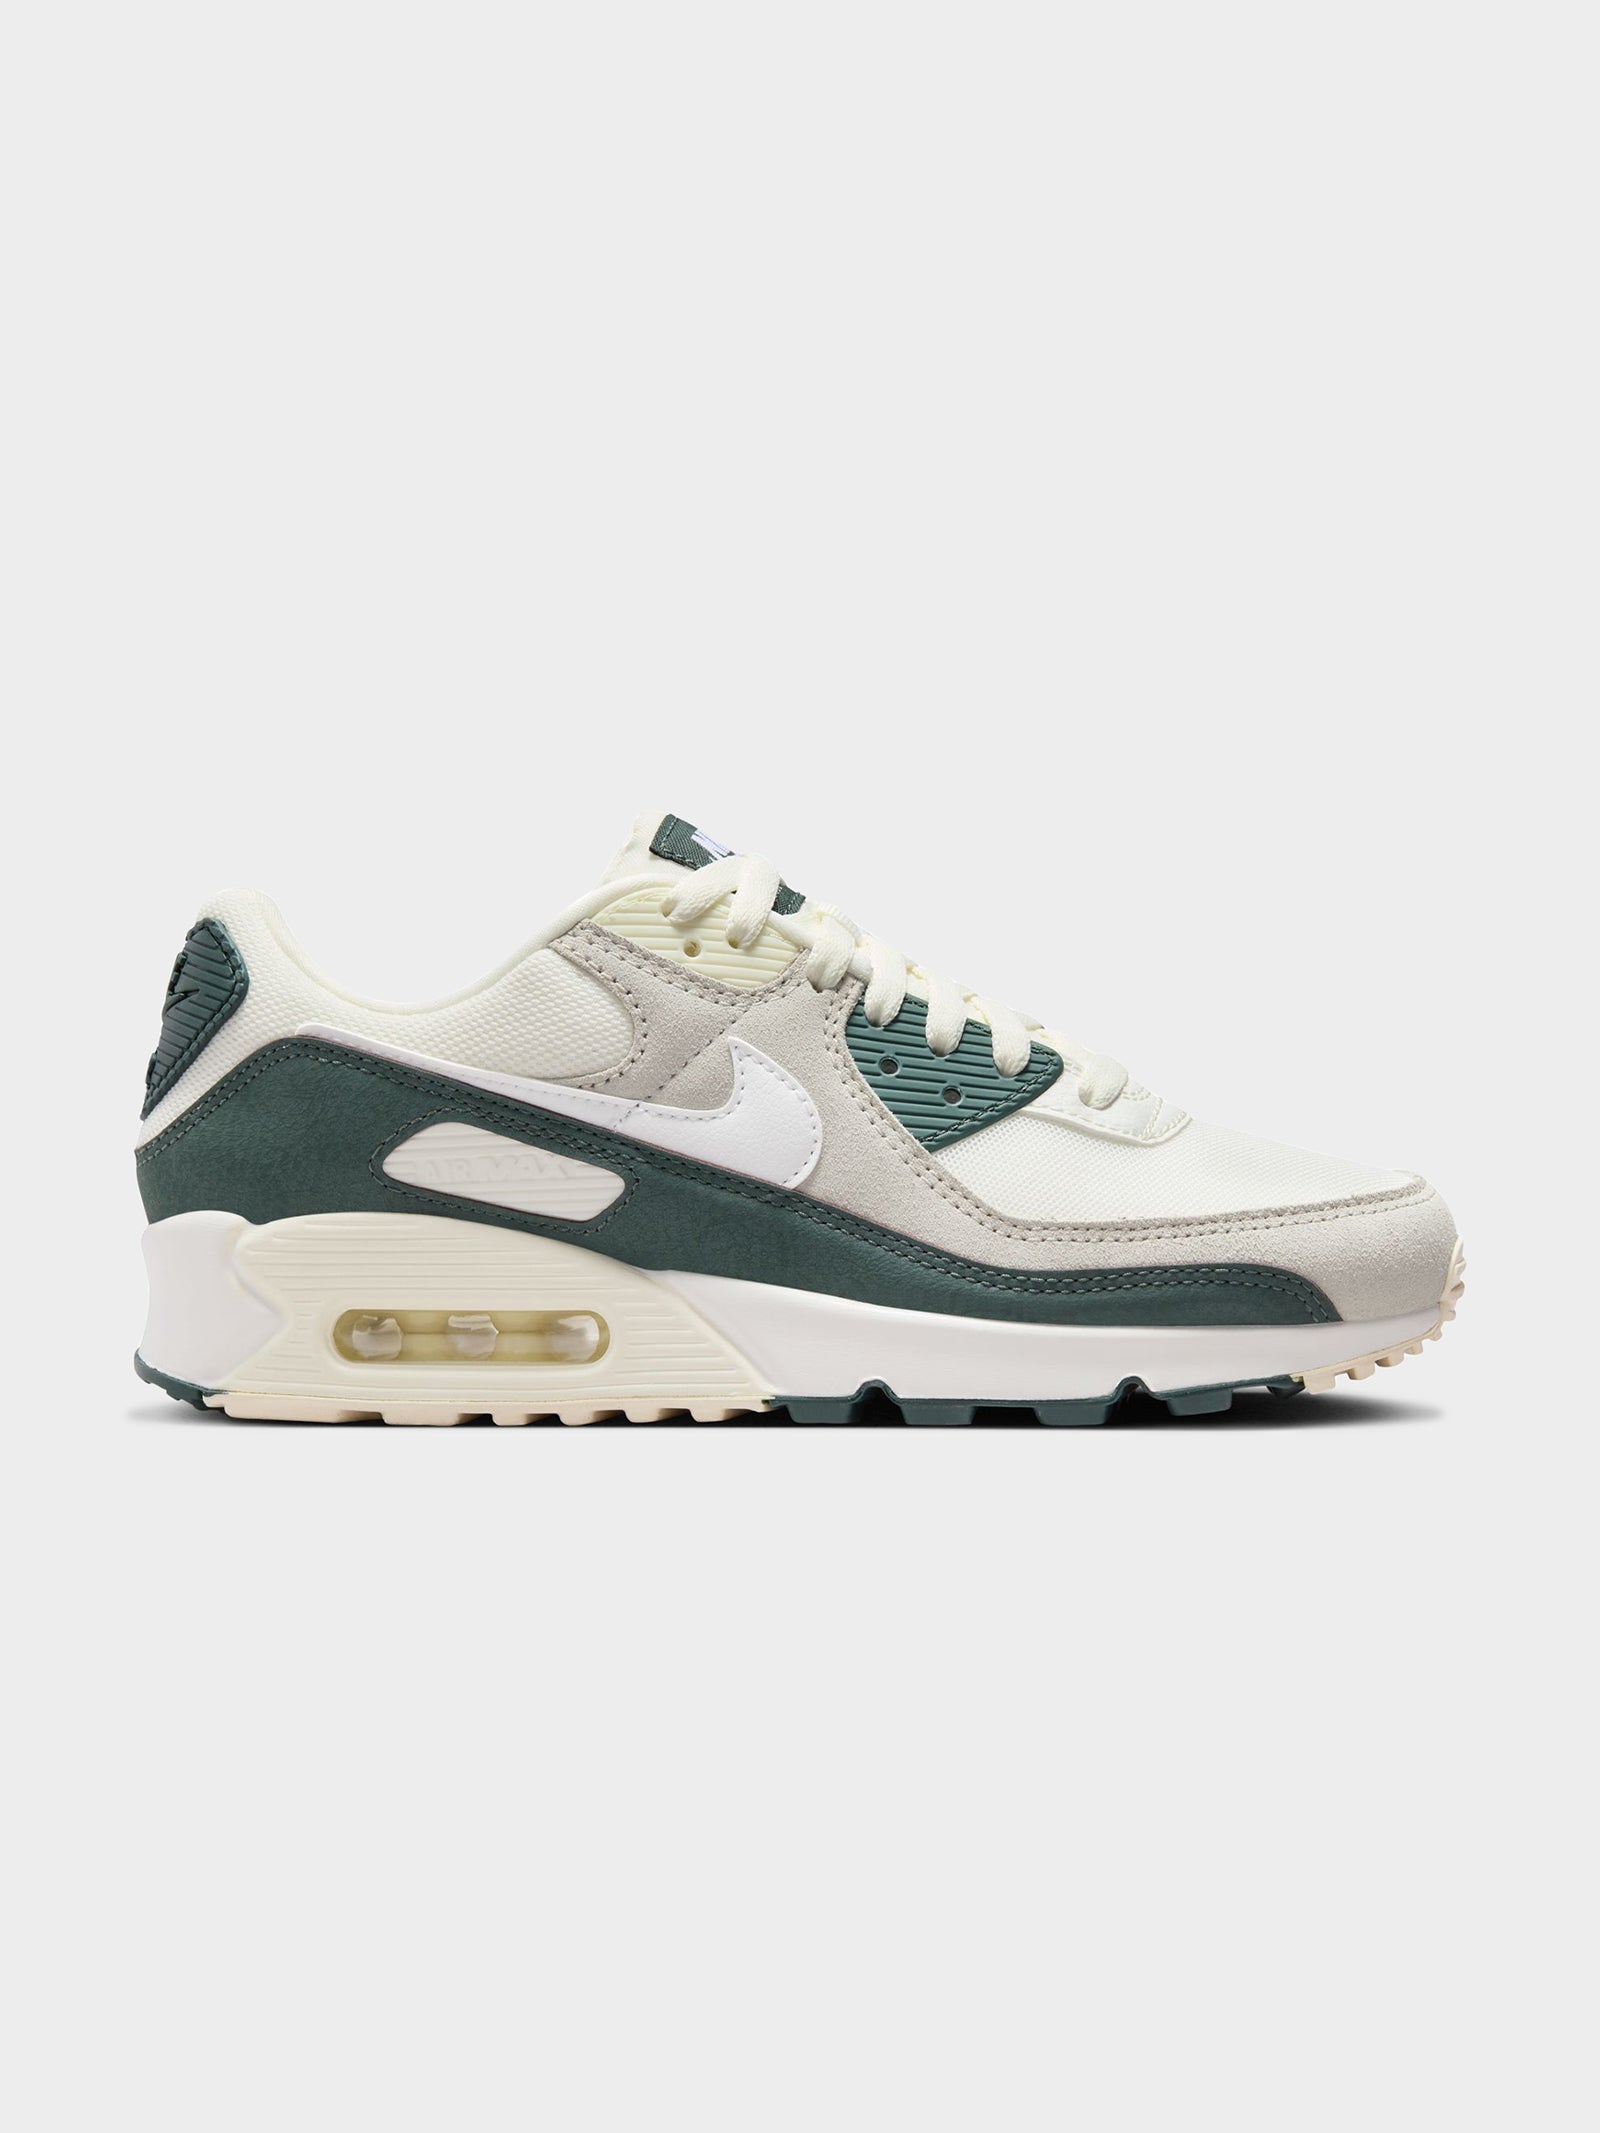 Womens Air Max 90 Sneakers in Sail, White, Green & Coconut Milk